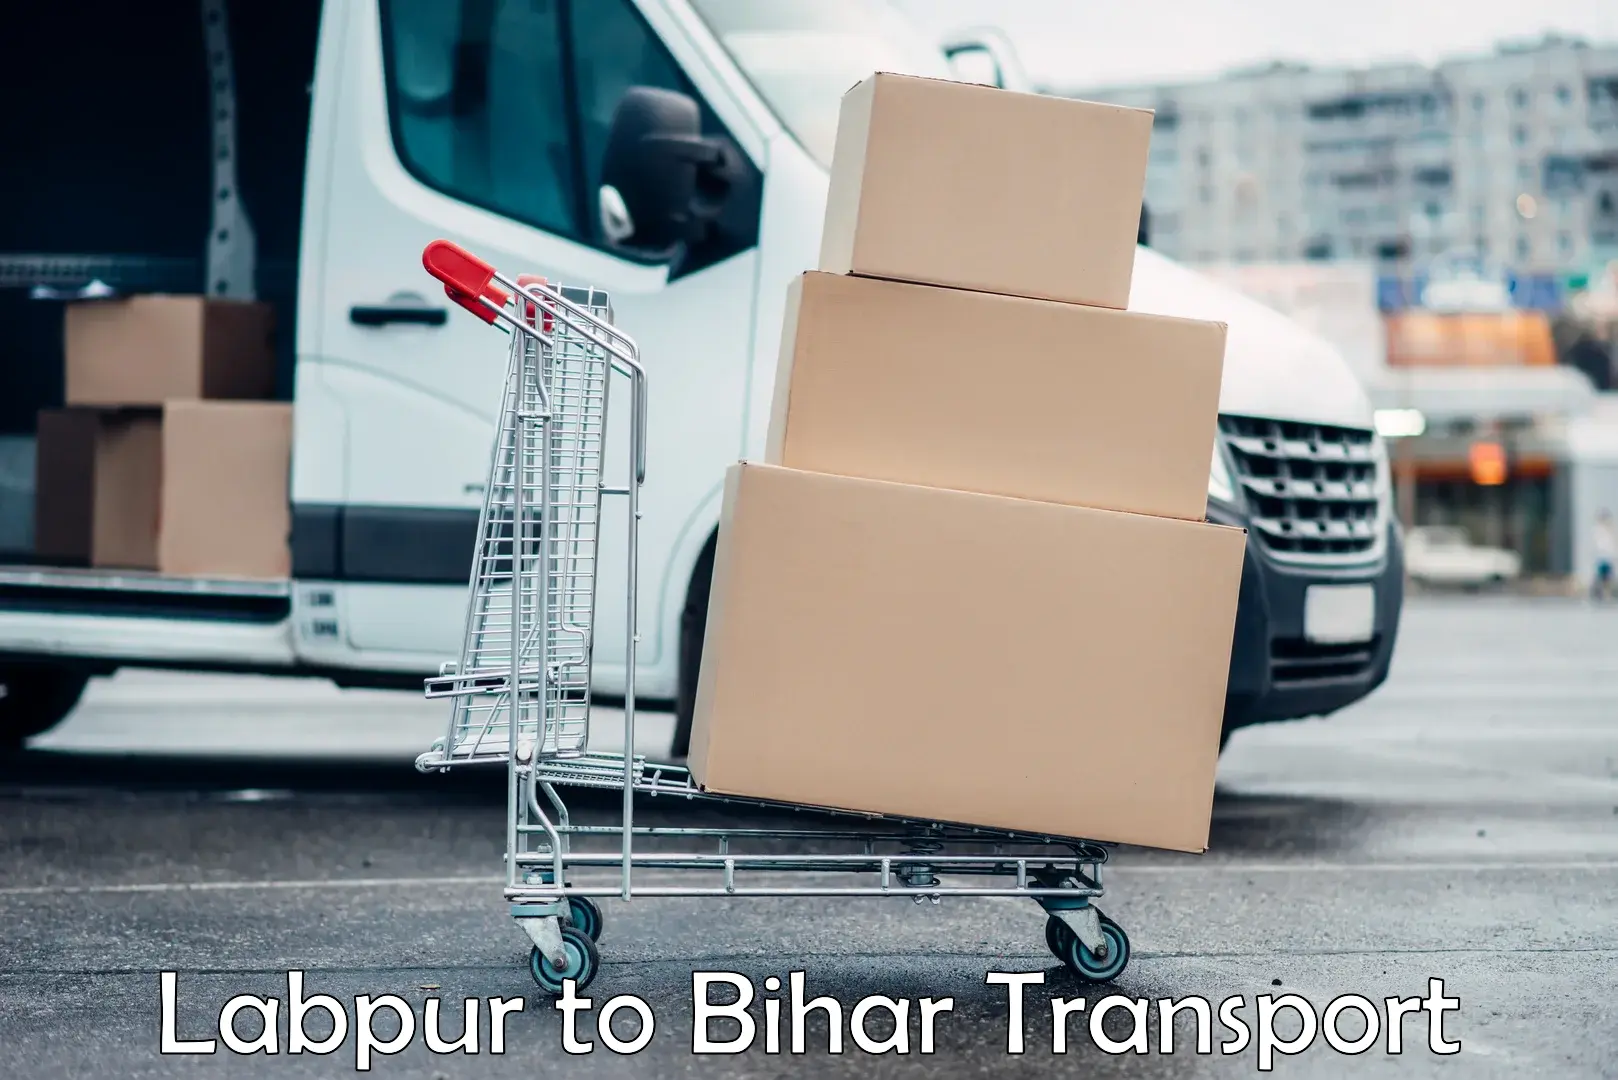 Transport bike from one state to another Labpur to Bharwara